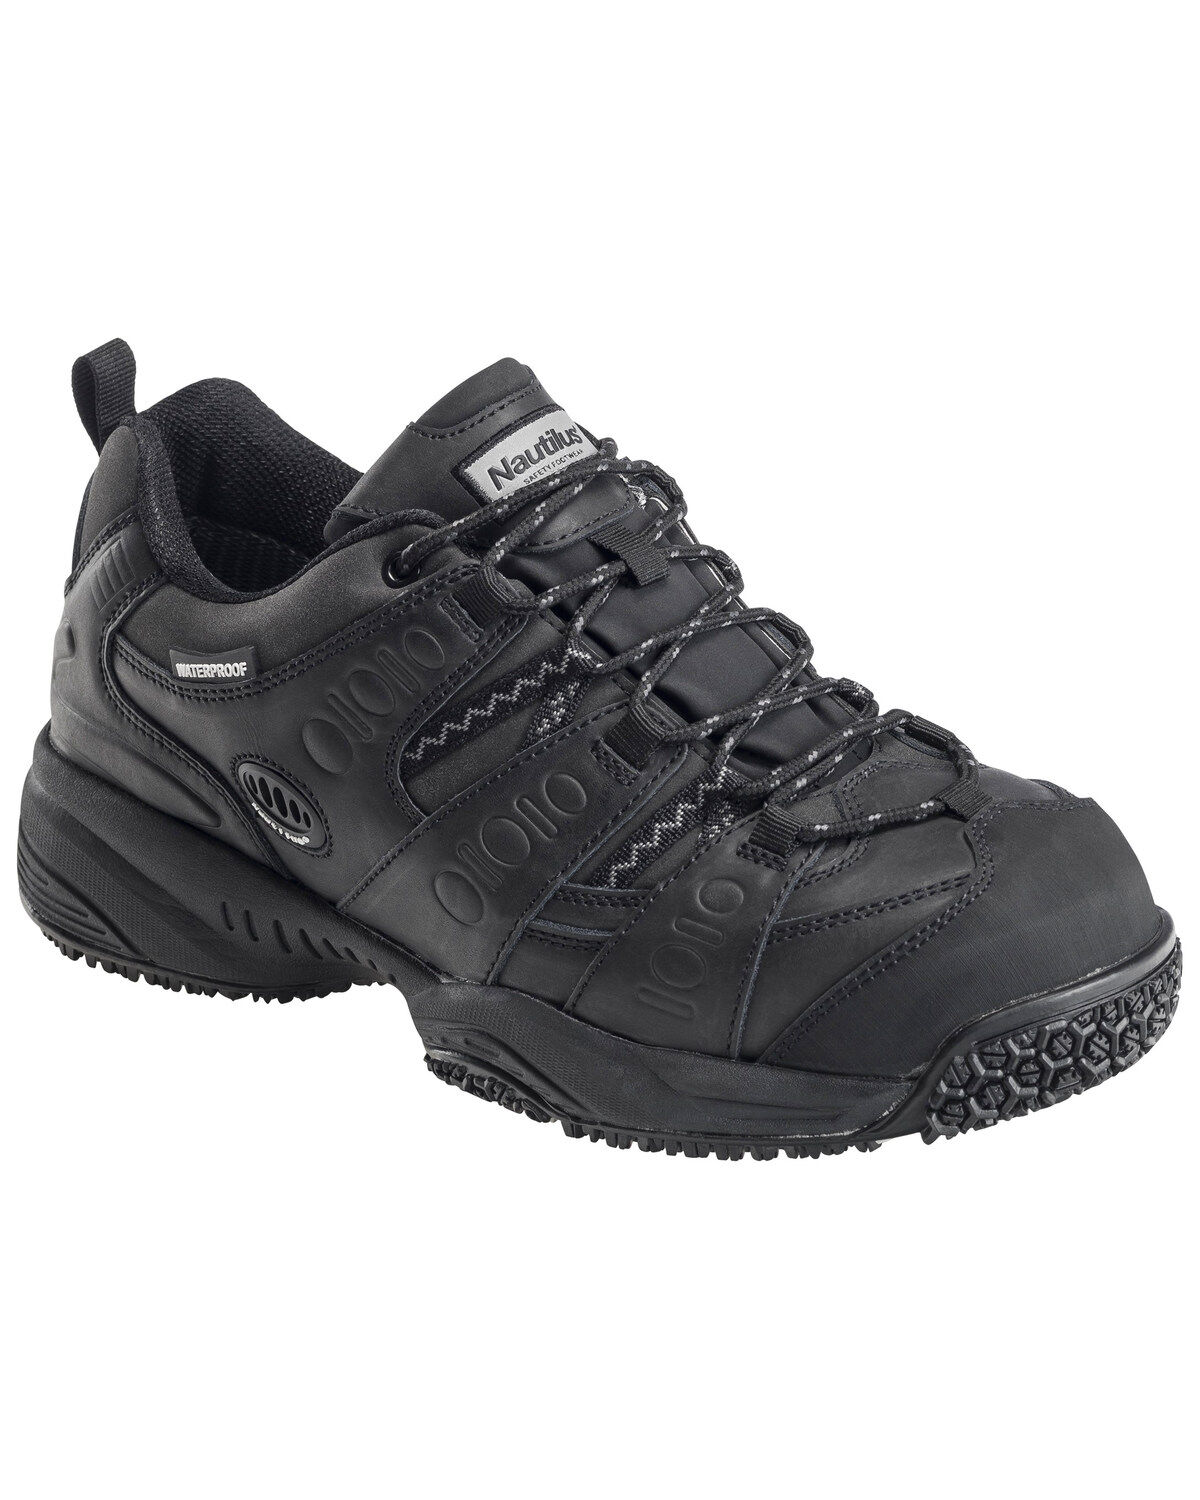 New collection of : Nautilus Men's Waterproof Athletic Work Shoes ...